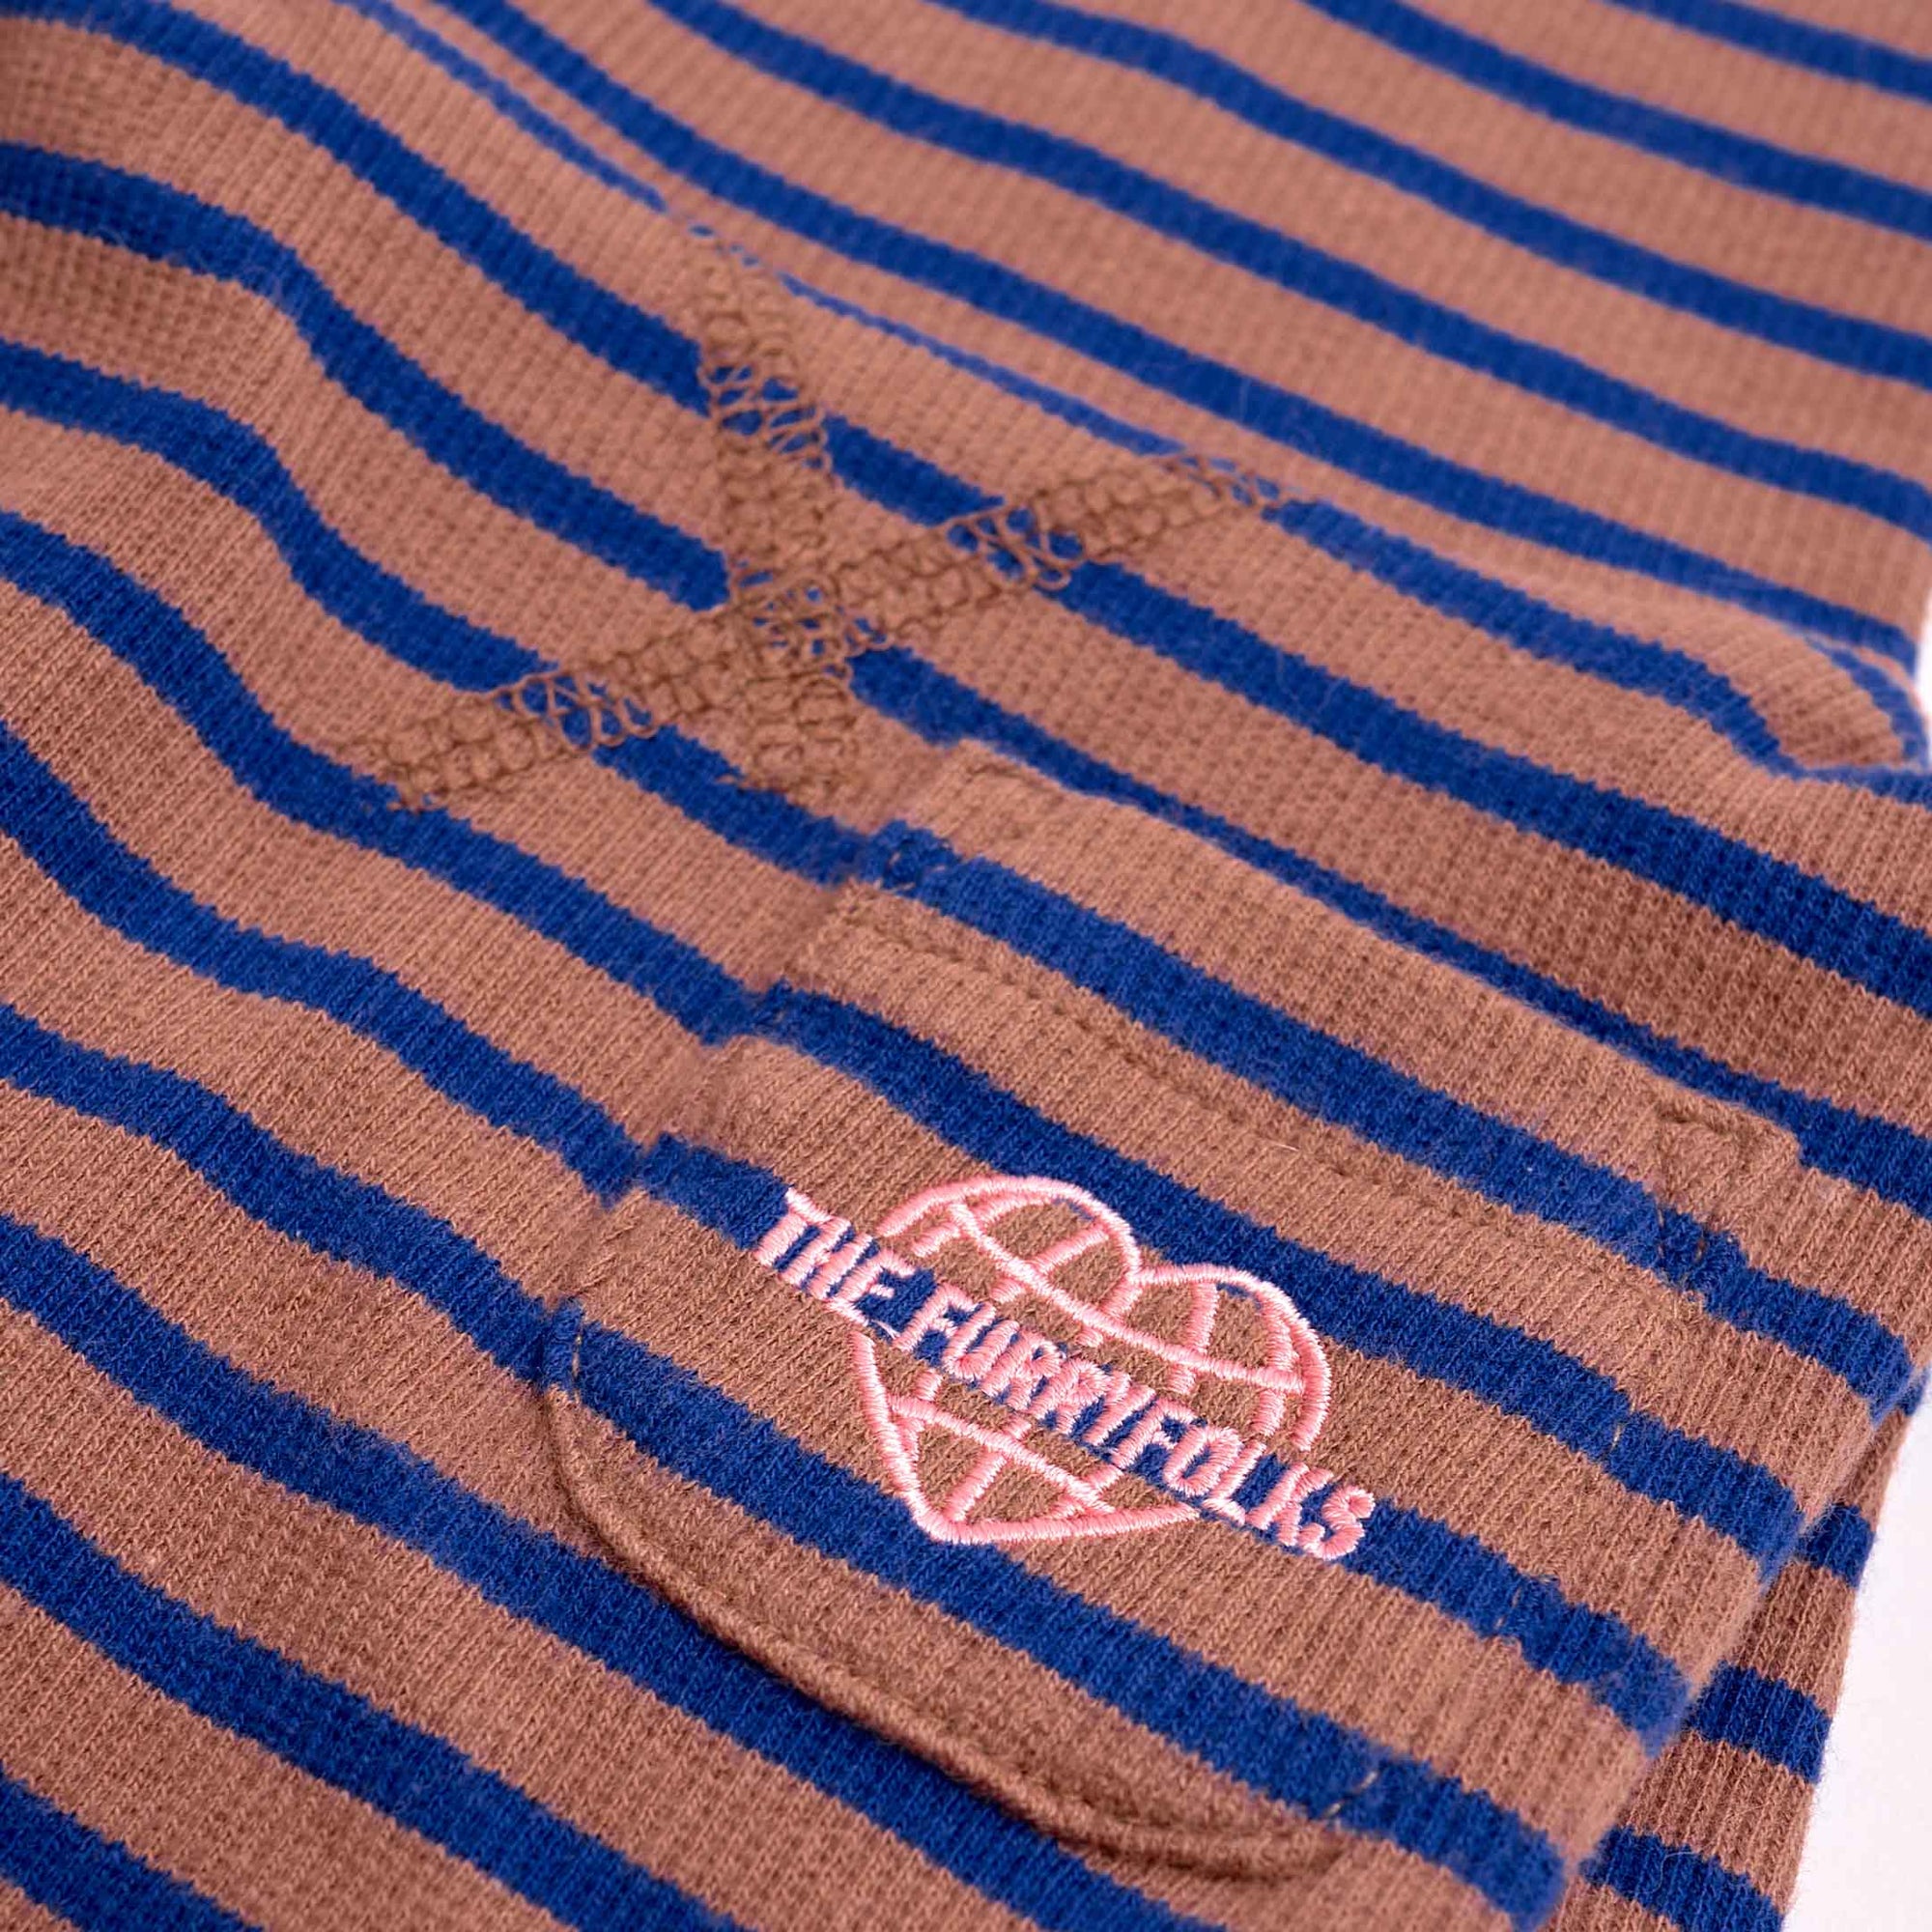 Detail of a Cobalt & Brown striped dog shirt featuring 'THE FURRYFOLKS' logo, embodying pet-friendly fashion.